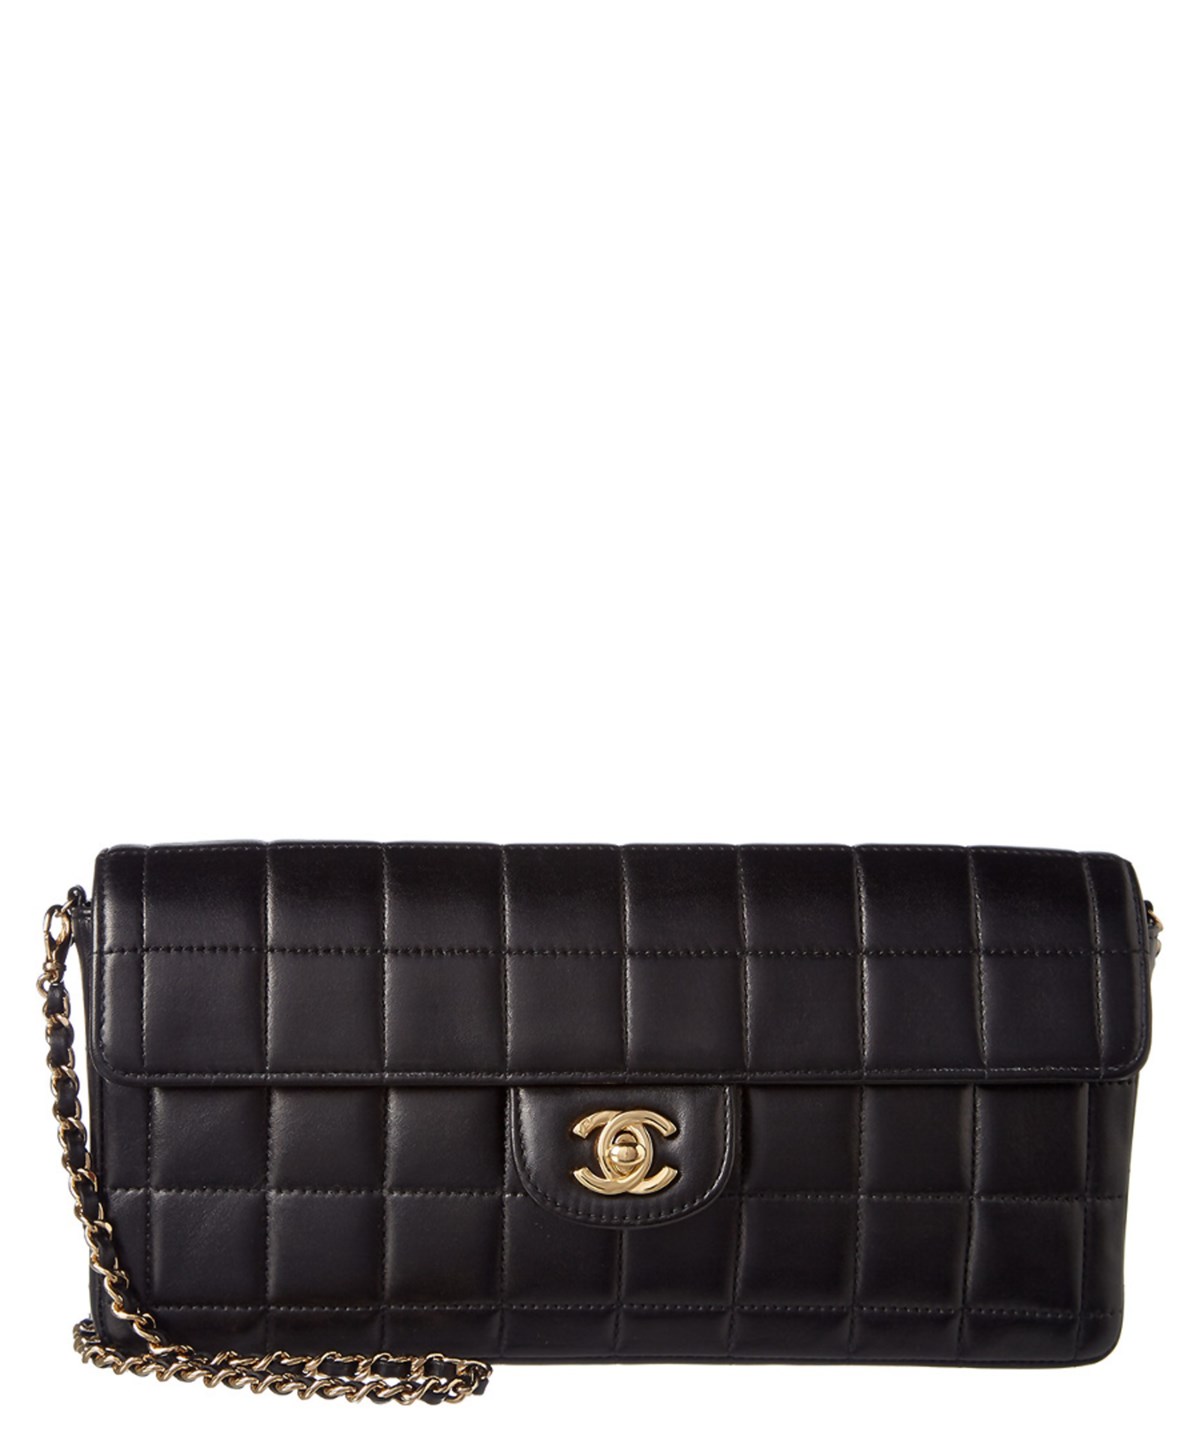 Chanel Black Chocolate Bar Quilted Lambskin Single Flap Bag' | ModeSens